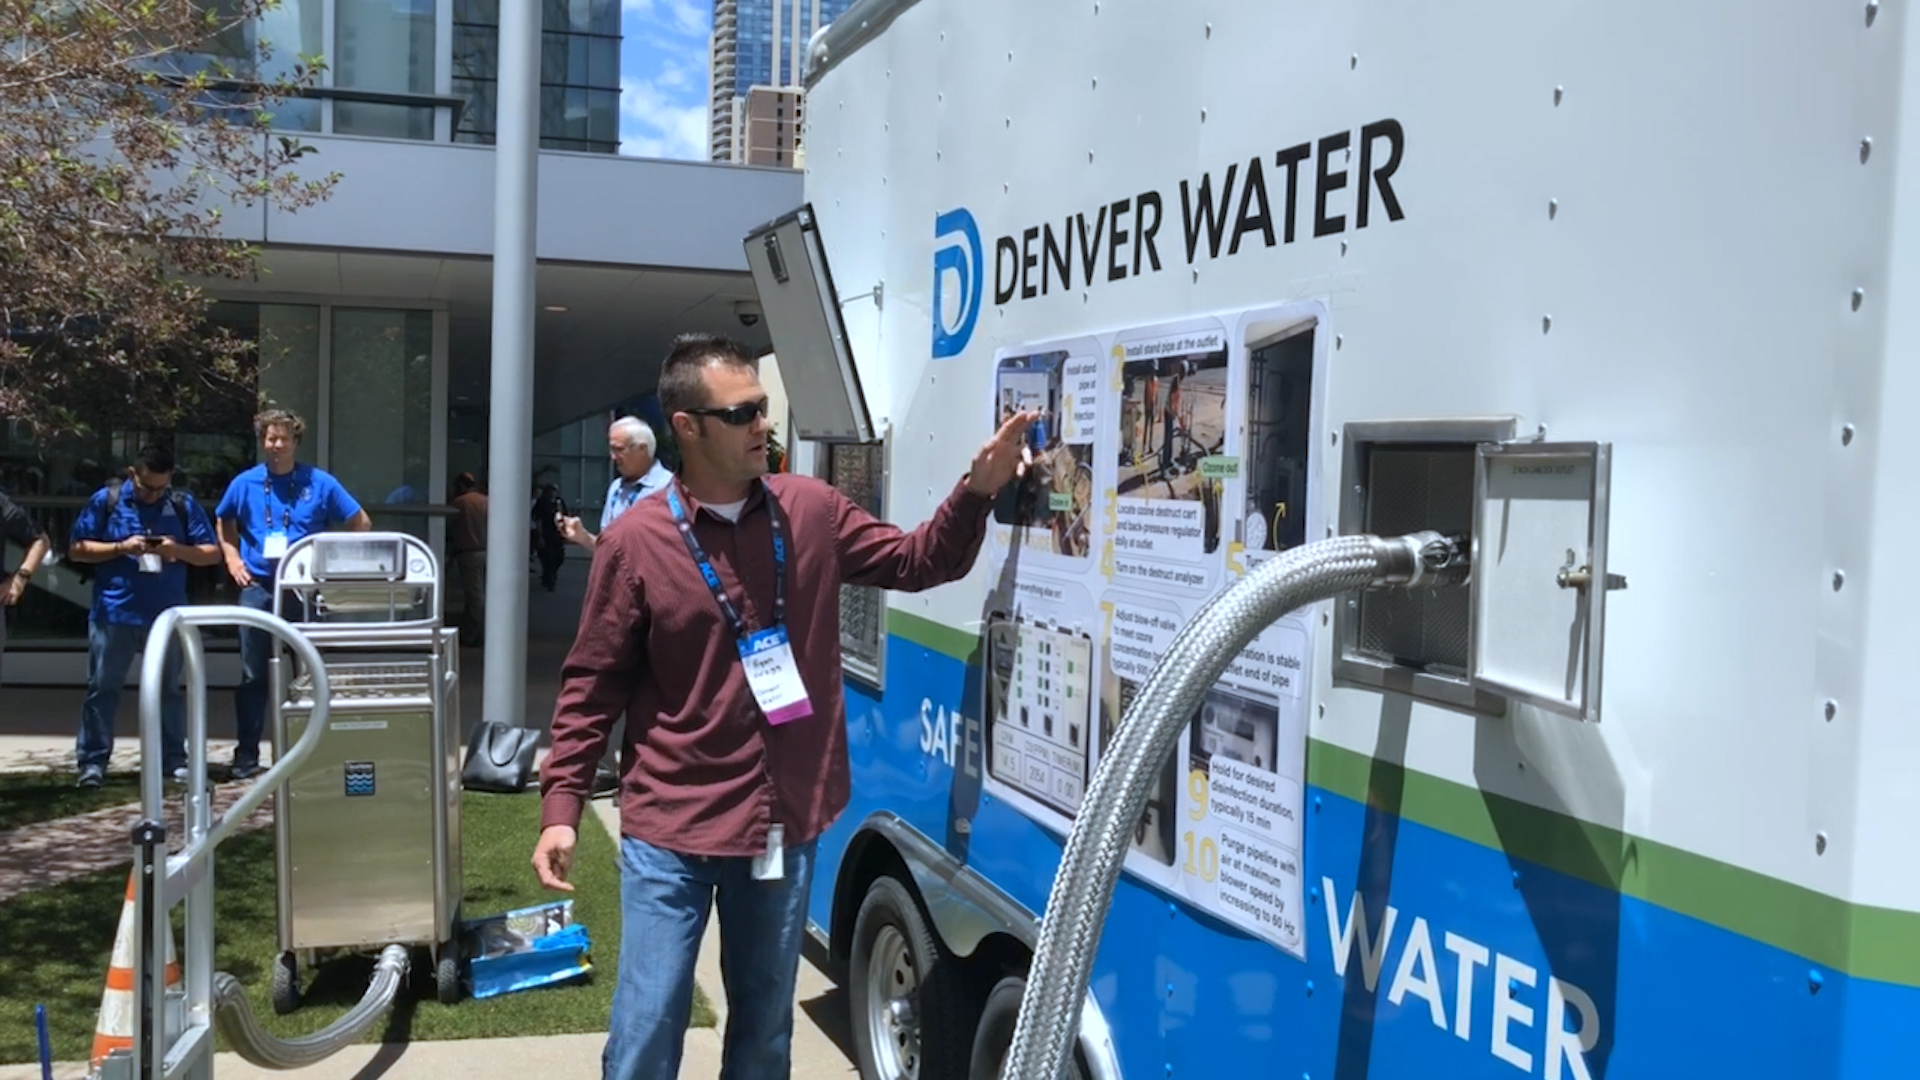 This picture shows a Denver Water employee displaying a water quality device.